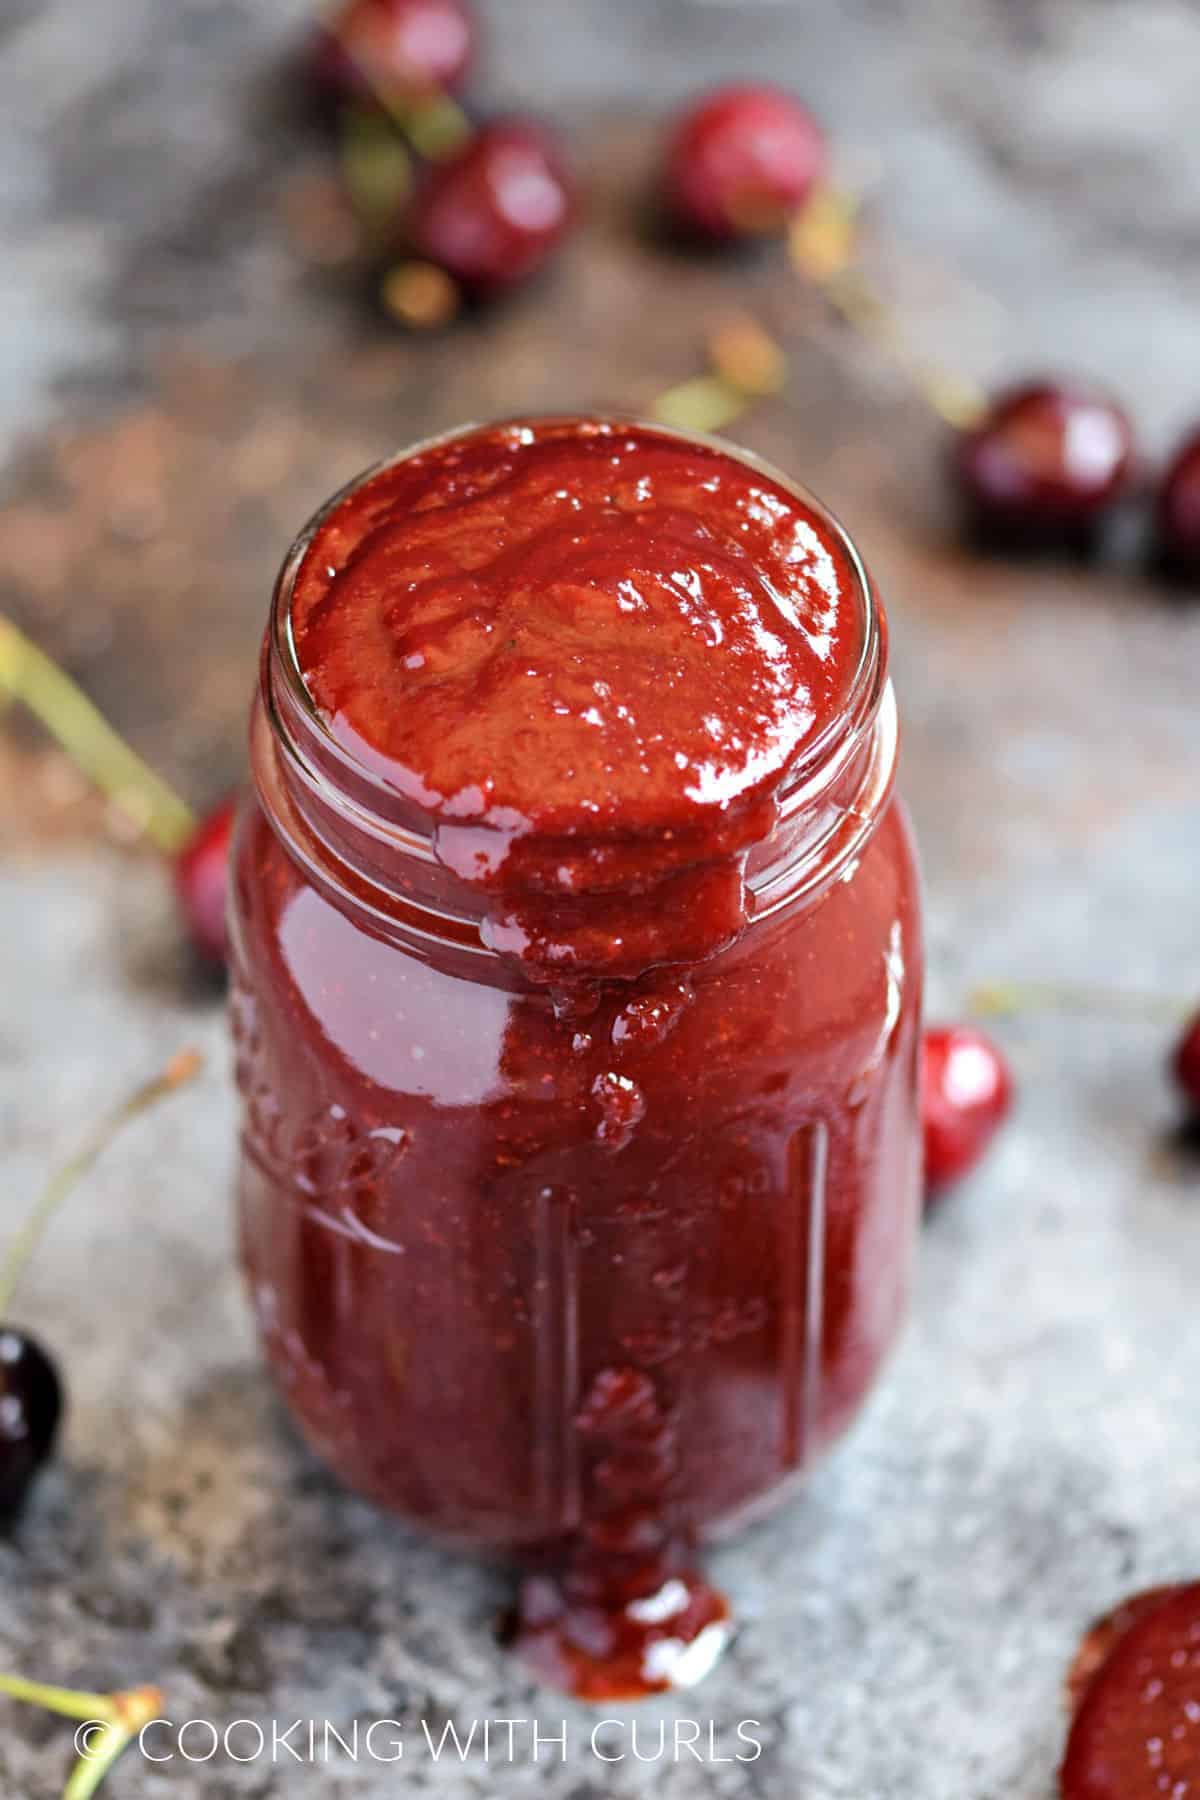 A glass jar overflowing with cherry barbecue sauce surrounded by fresh cherries.